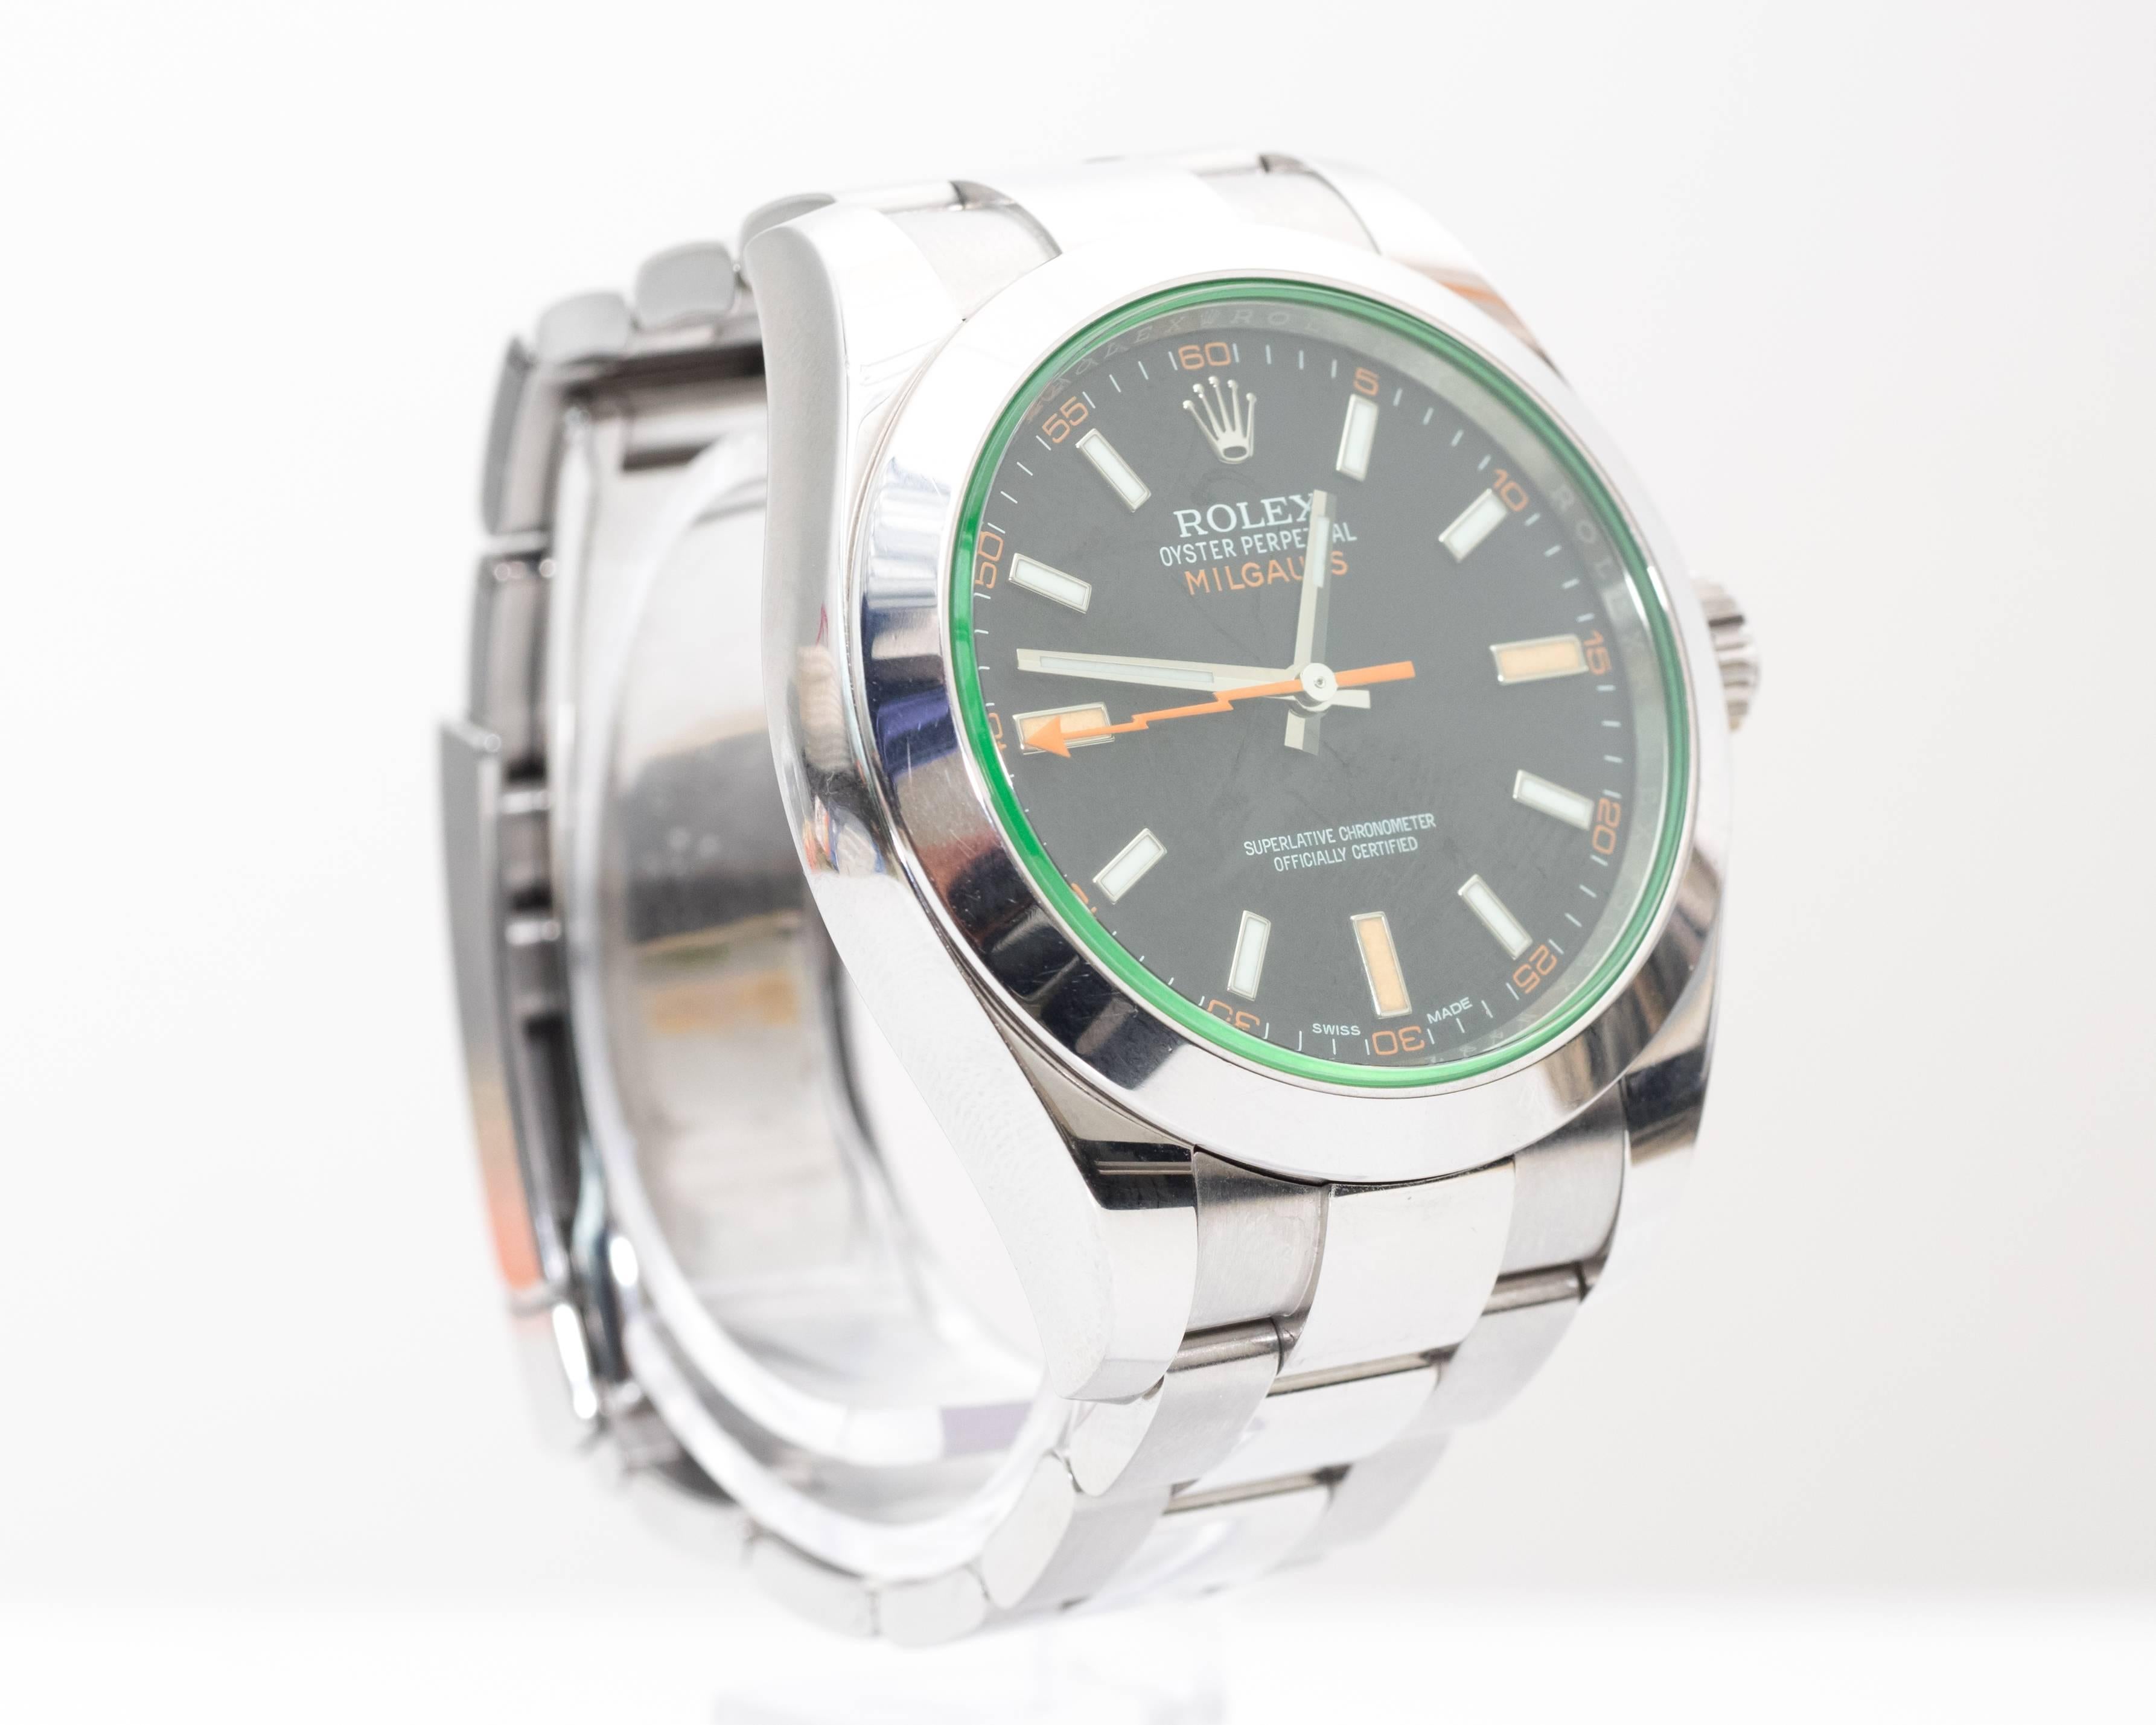 Absolutely stunning Rolex Milgauss wristwatch
Stainless Steel
Model 116400

This Rolex Milgauss watch is instantly recognizable. Created by Rolex in 1956 for scientists, this watch was the first of it's kind, designed to be resistant to the effects